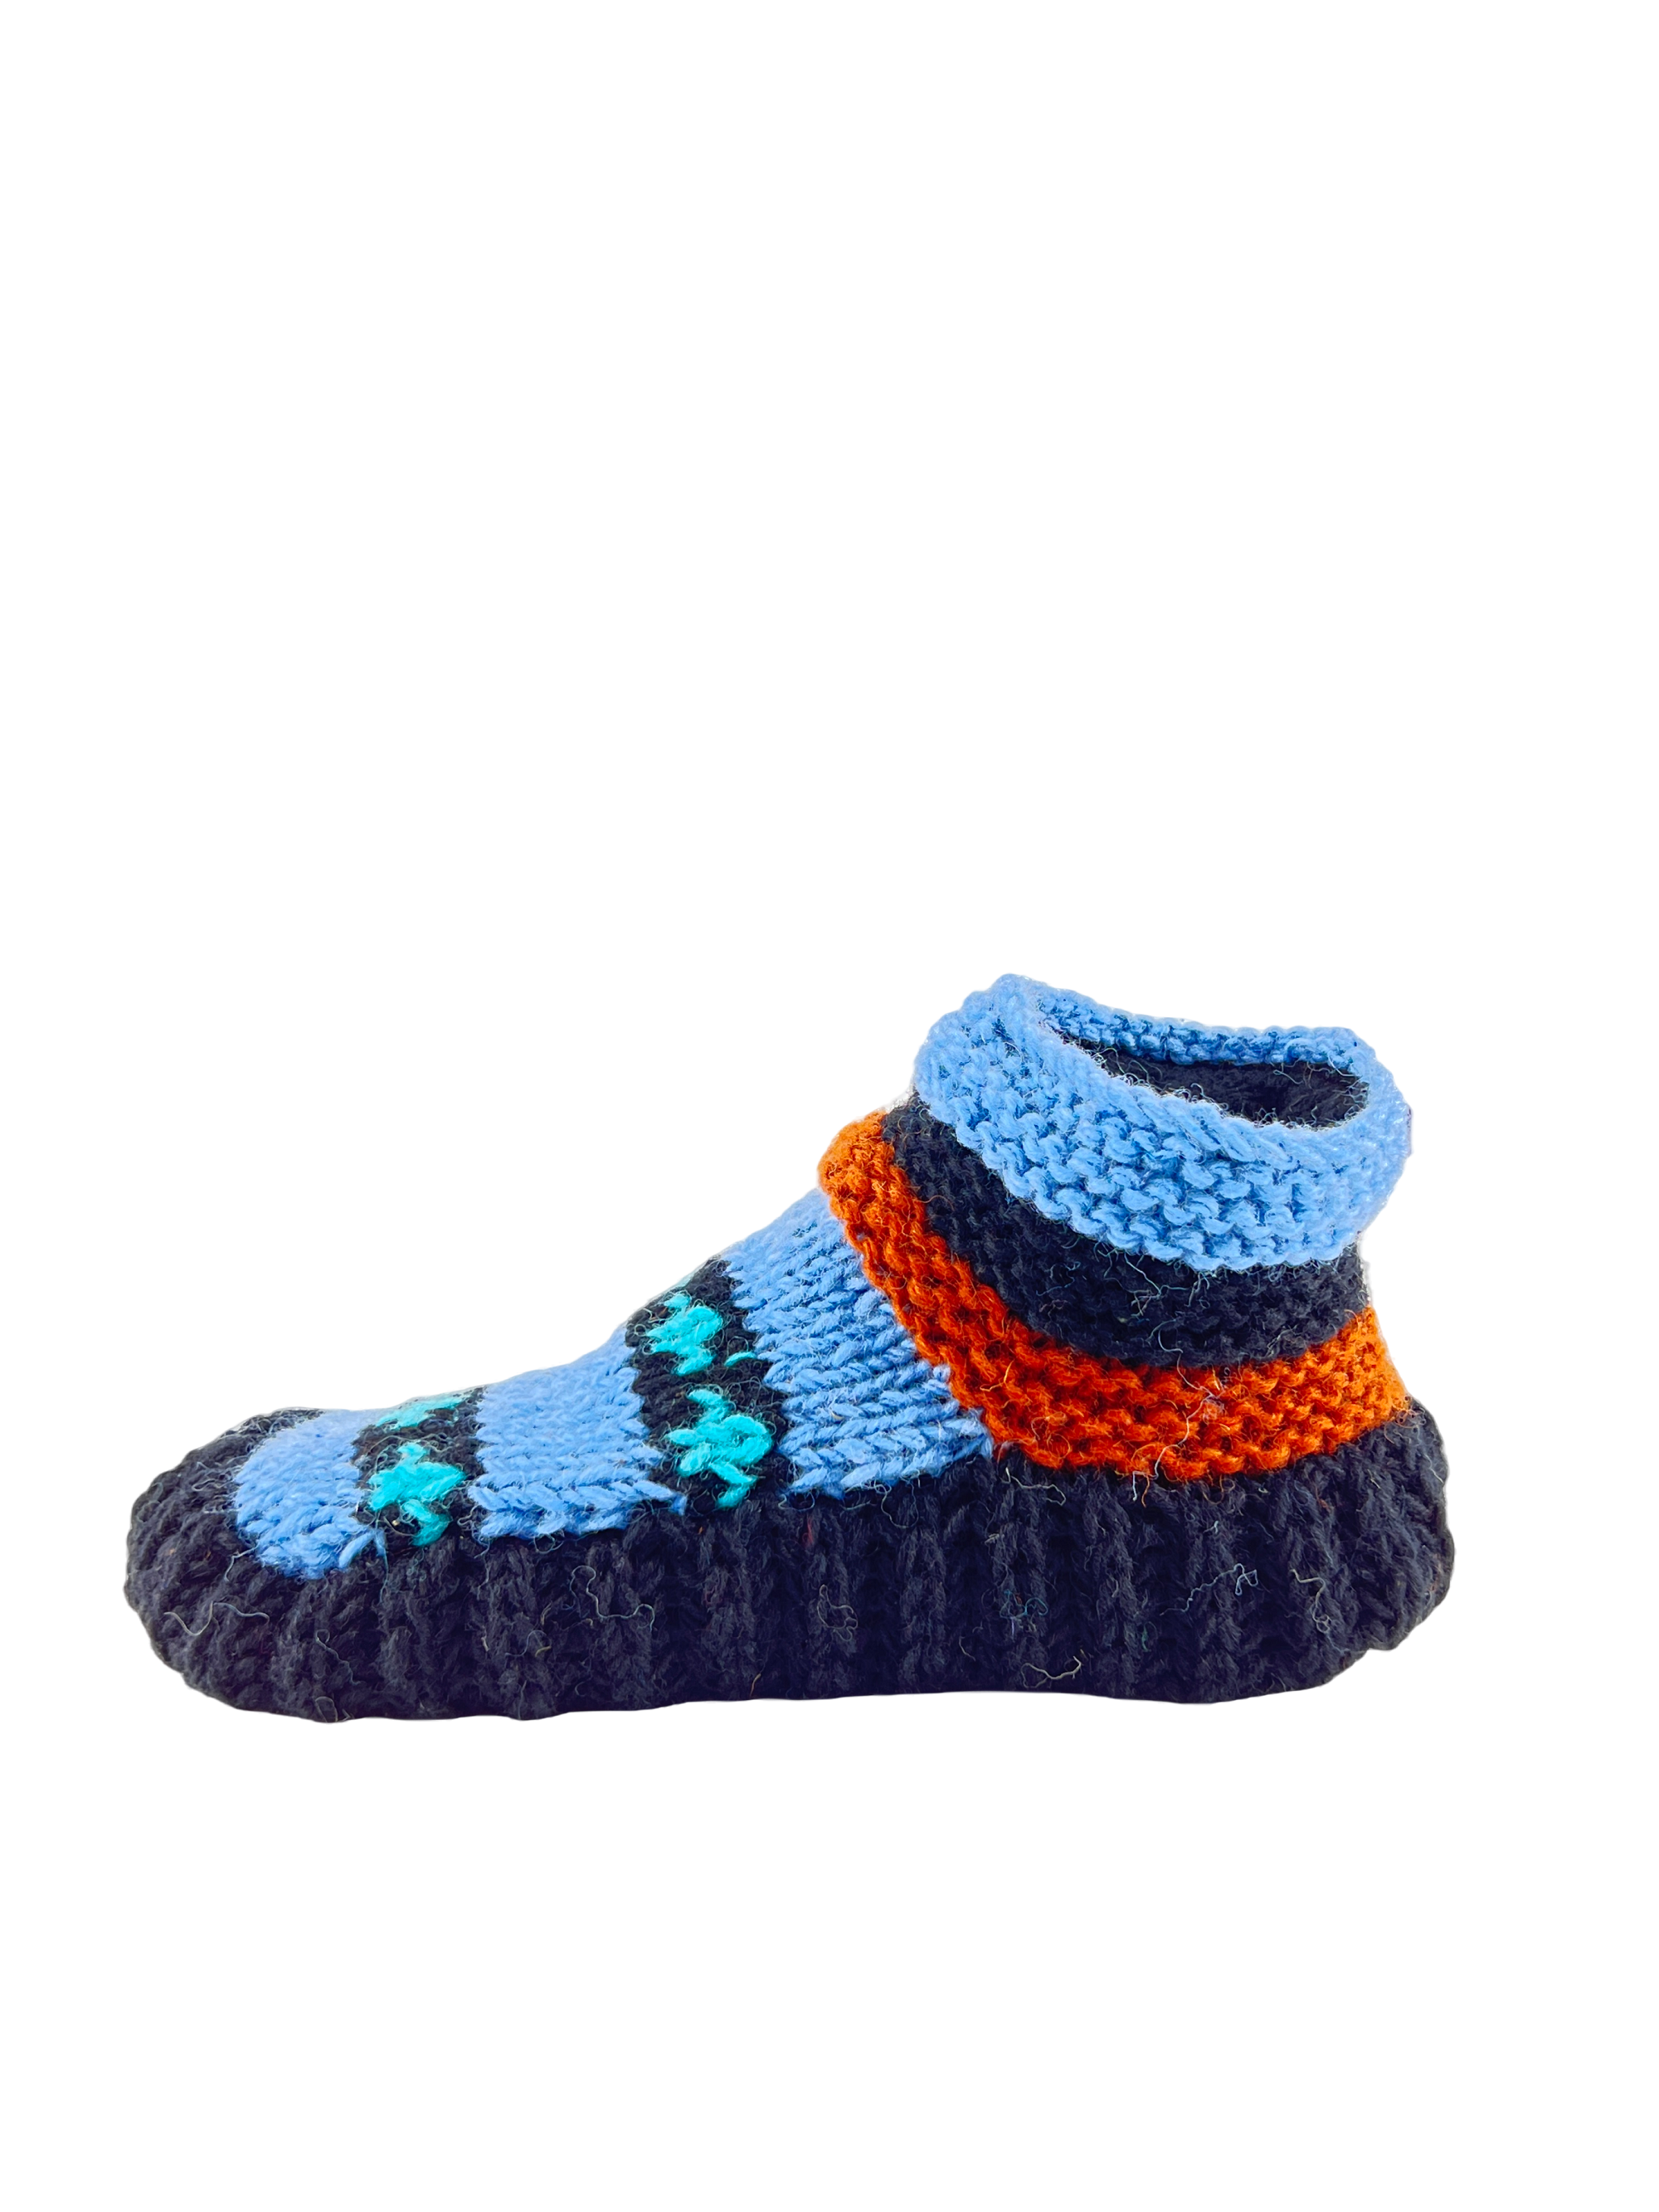 Comfy home shoes | Non slip Sole | Fuzzy Slippers Boots | Plush slippers| Adult home slippers| woolly socks | Fleece lined pure wool slipper